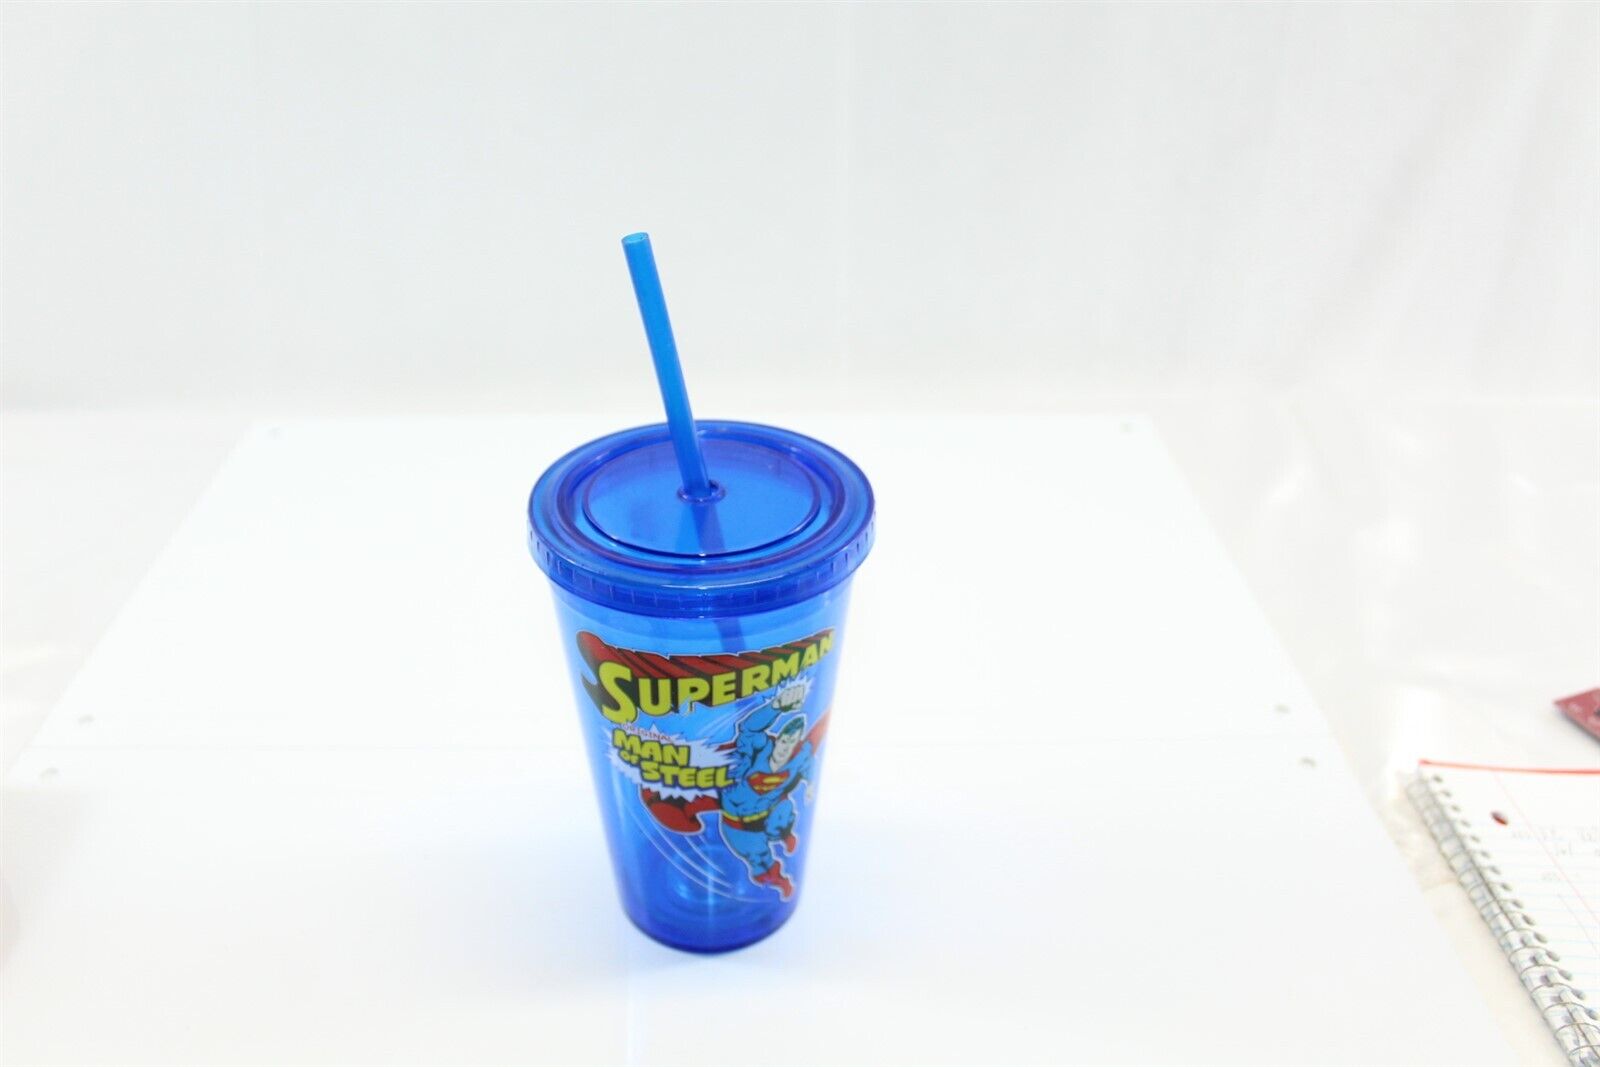 Vintage 2013 Superman Logo Blue Plastic Drink Cup 20oz Insulated Collectible